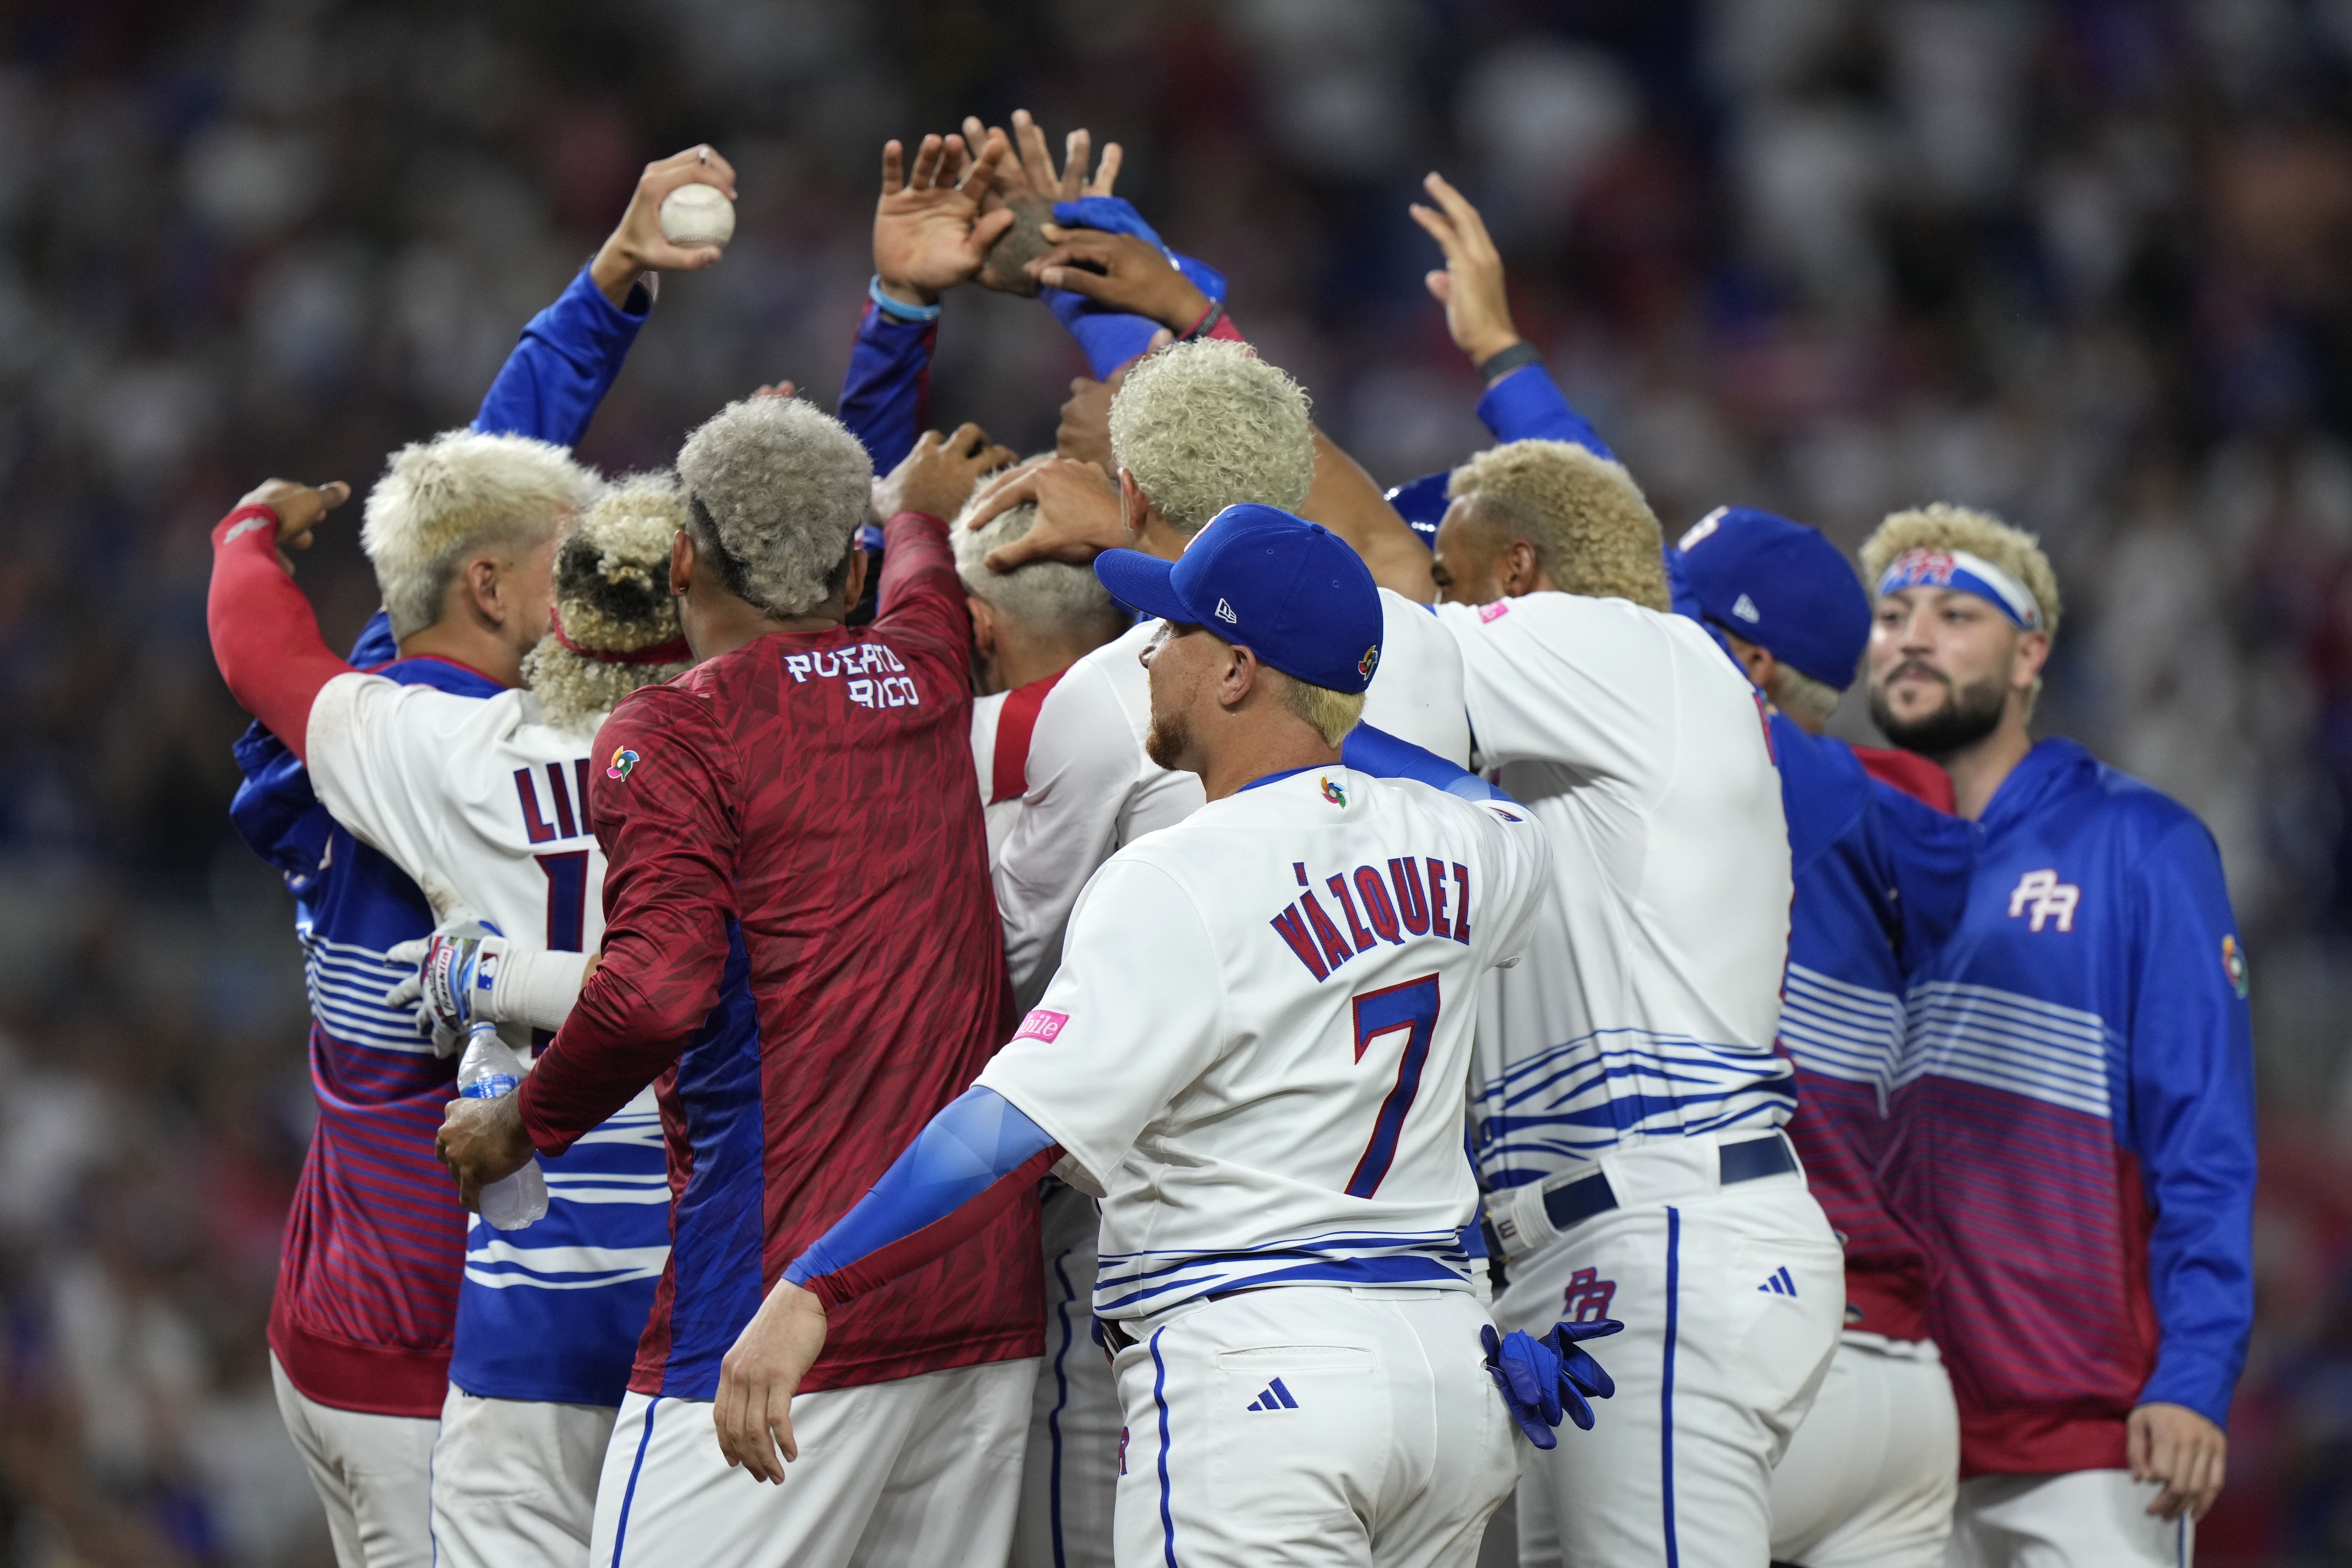 Mets Morning News: Happy World Baseball Classic to all who